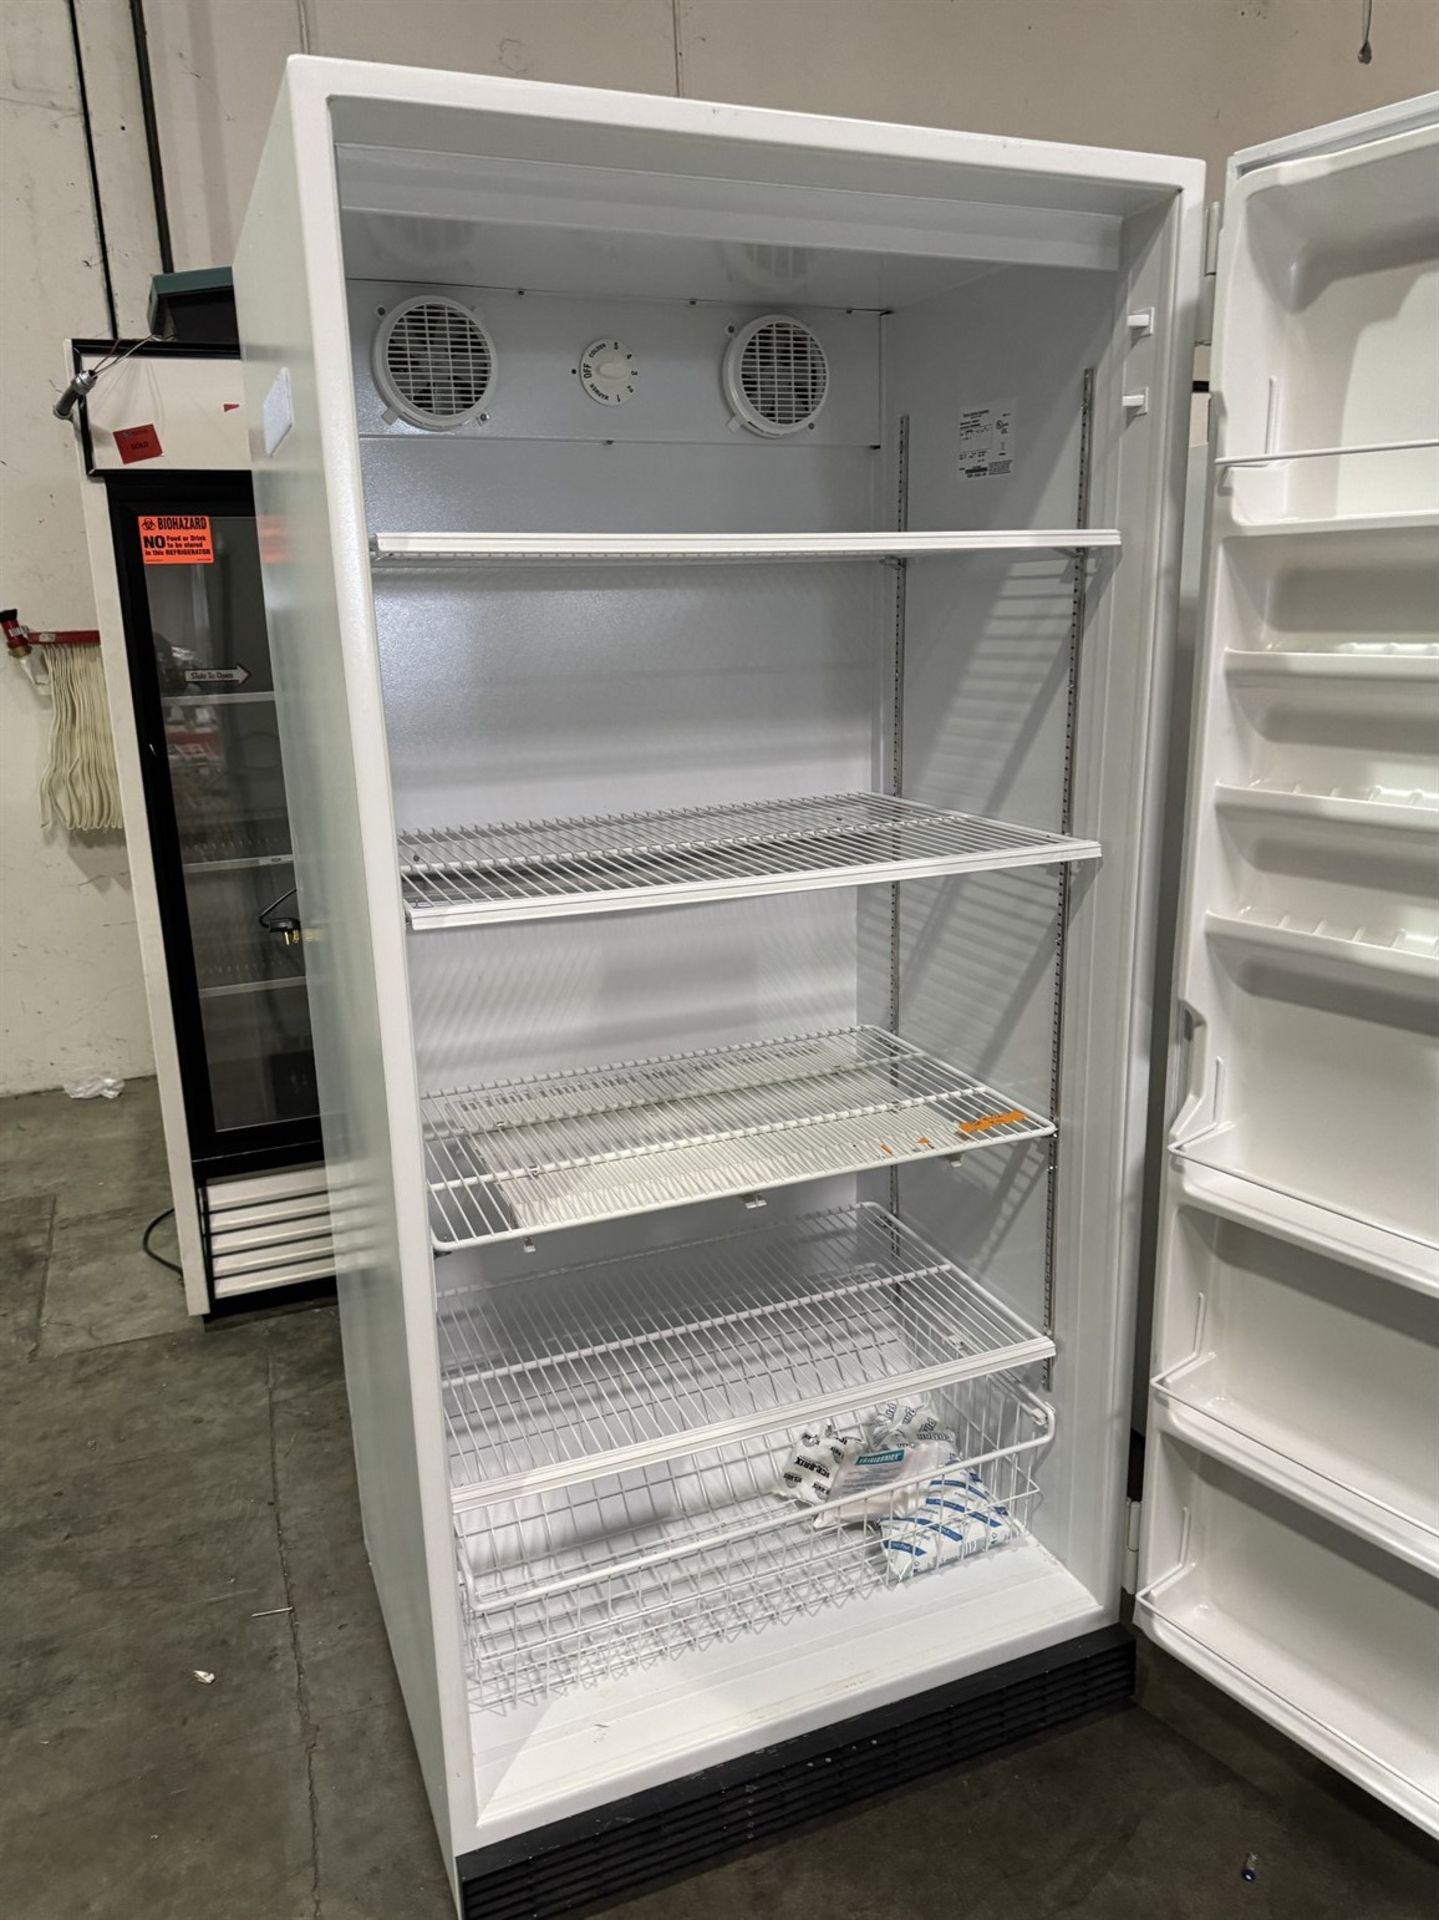 THERMO ELECTRON R429GA14 General Purpose Refrigerator, s/n W20R-615259-WR - Image 2 of 4